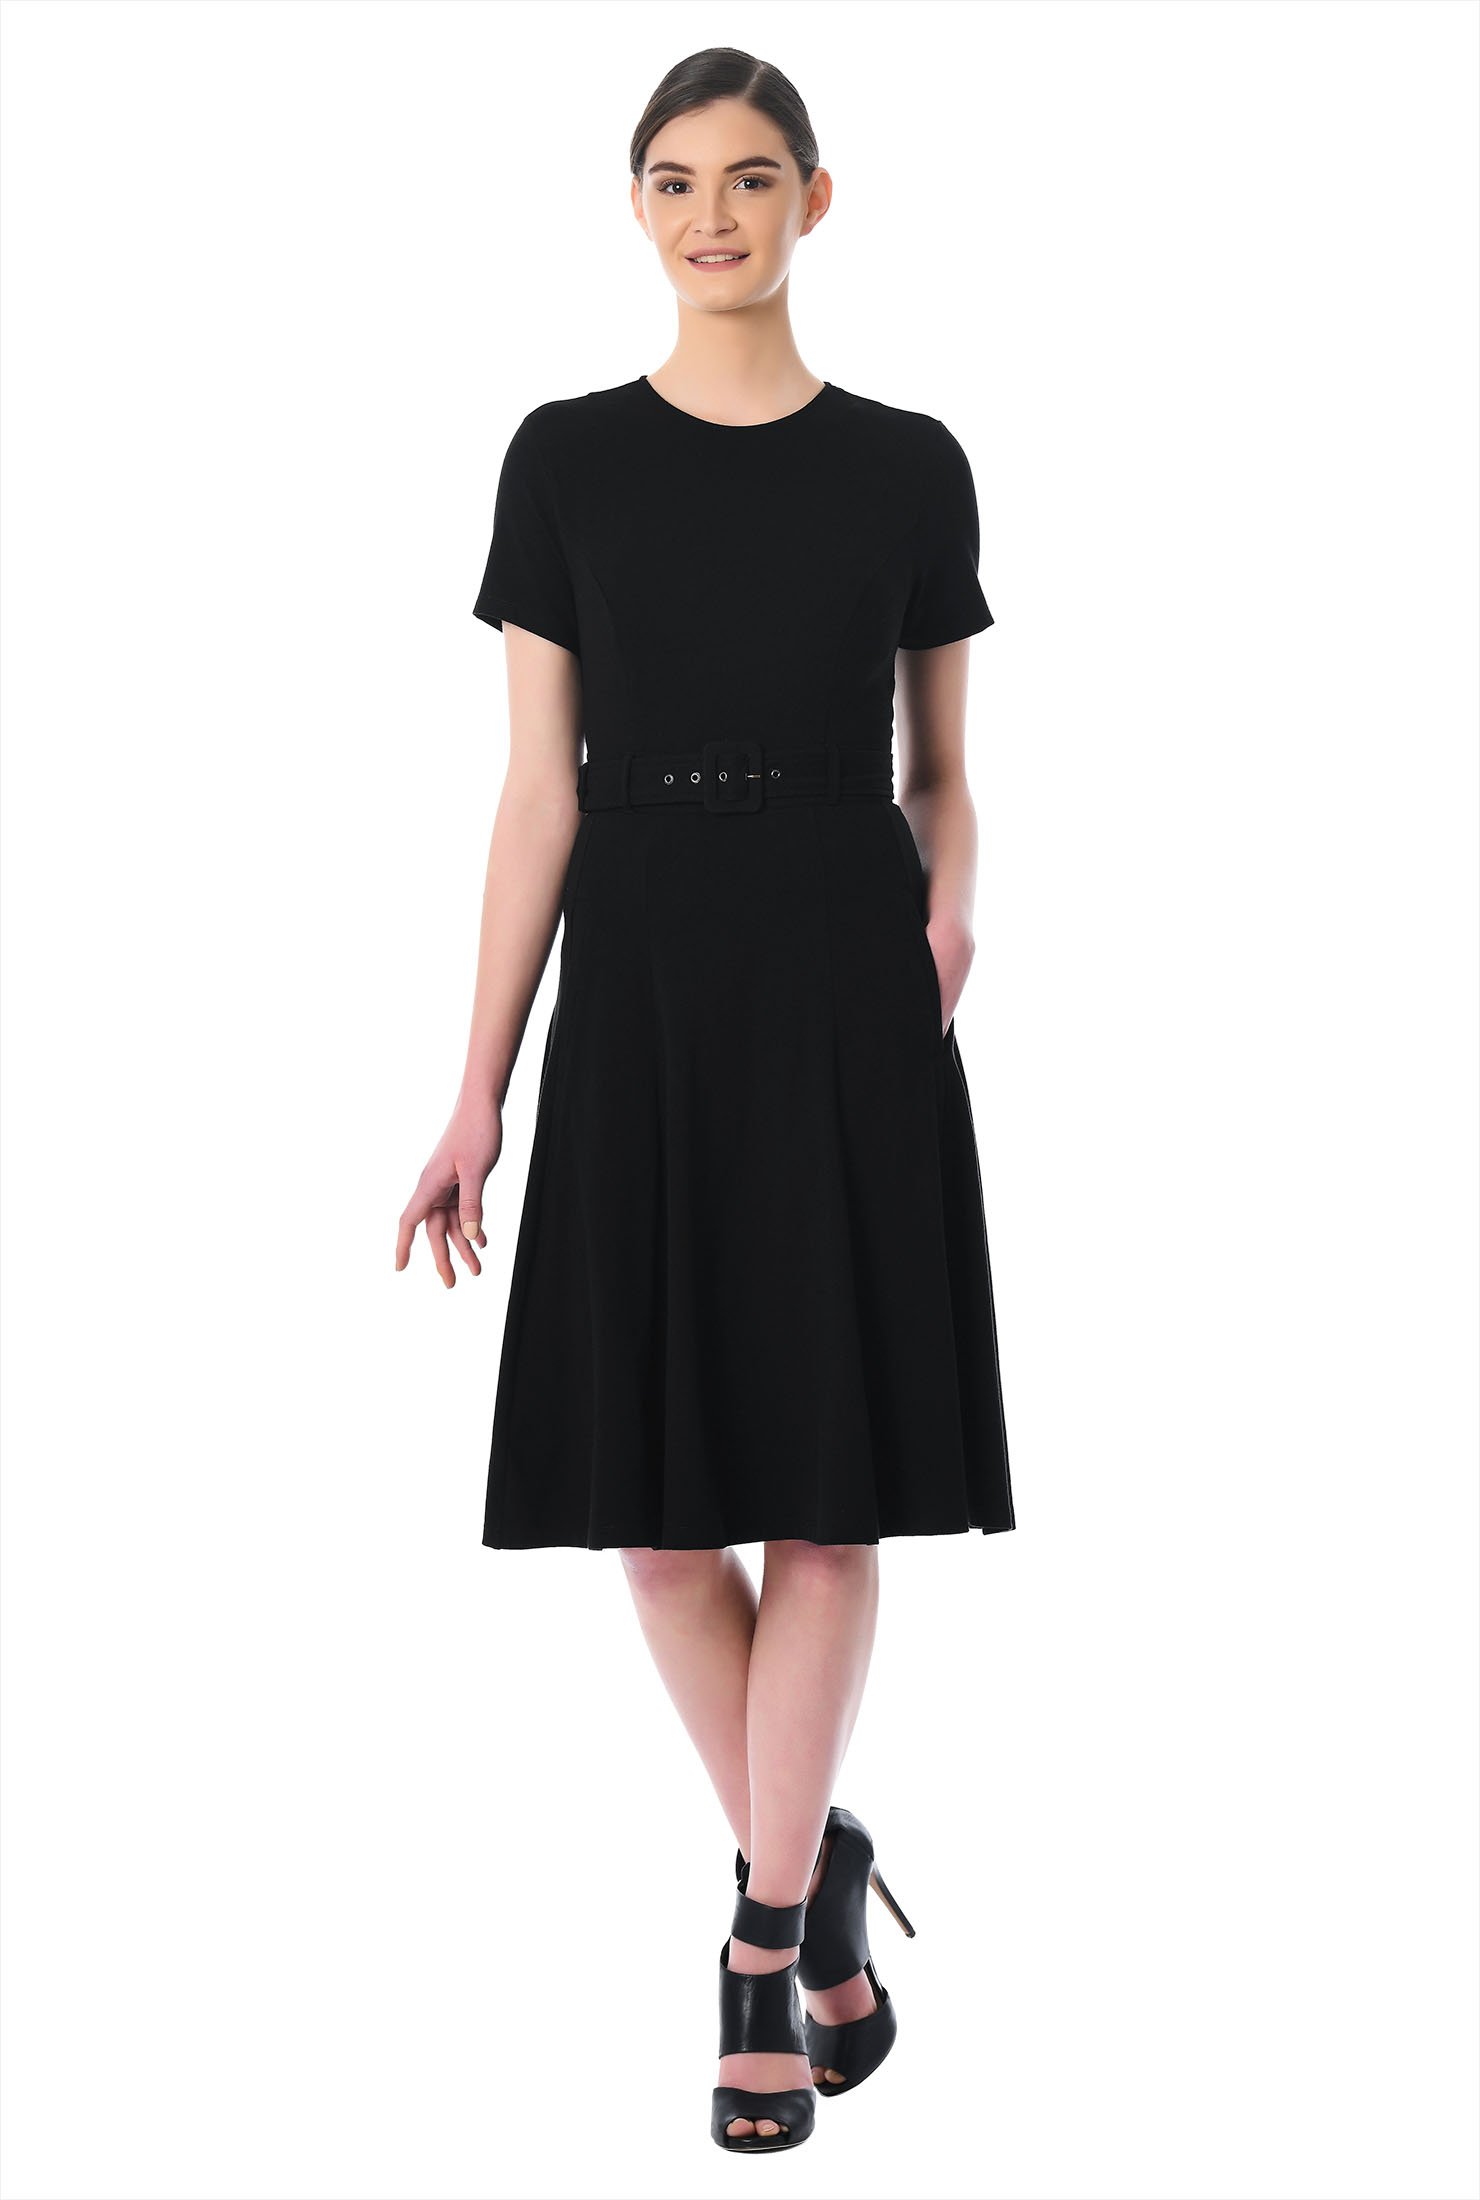 Shop Cotton knit belted fit-and-flare dress | eShakti